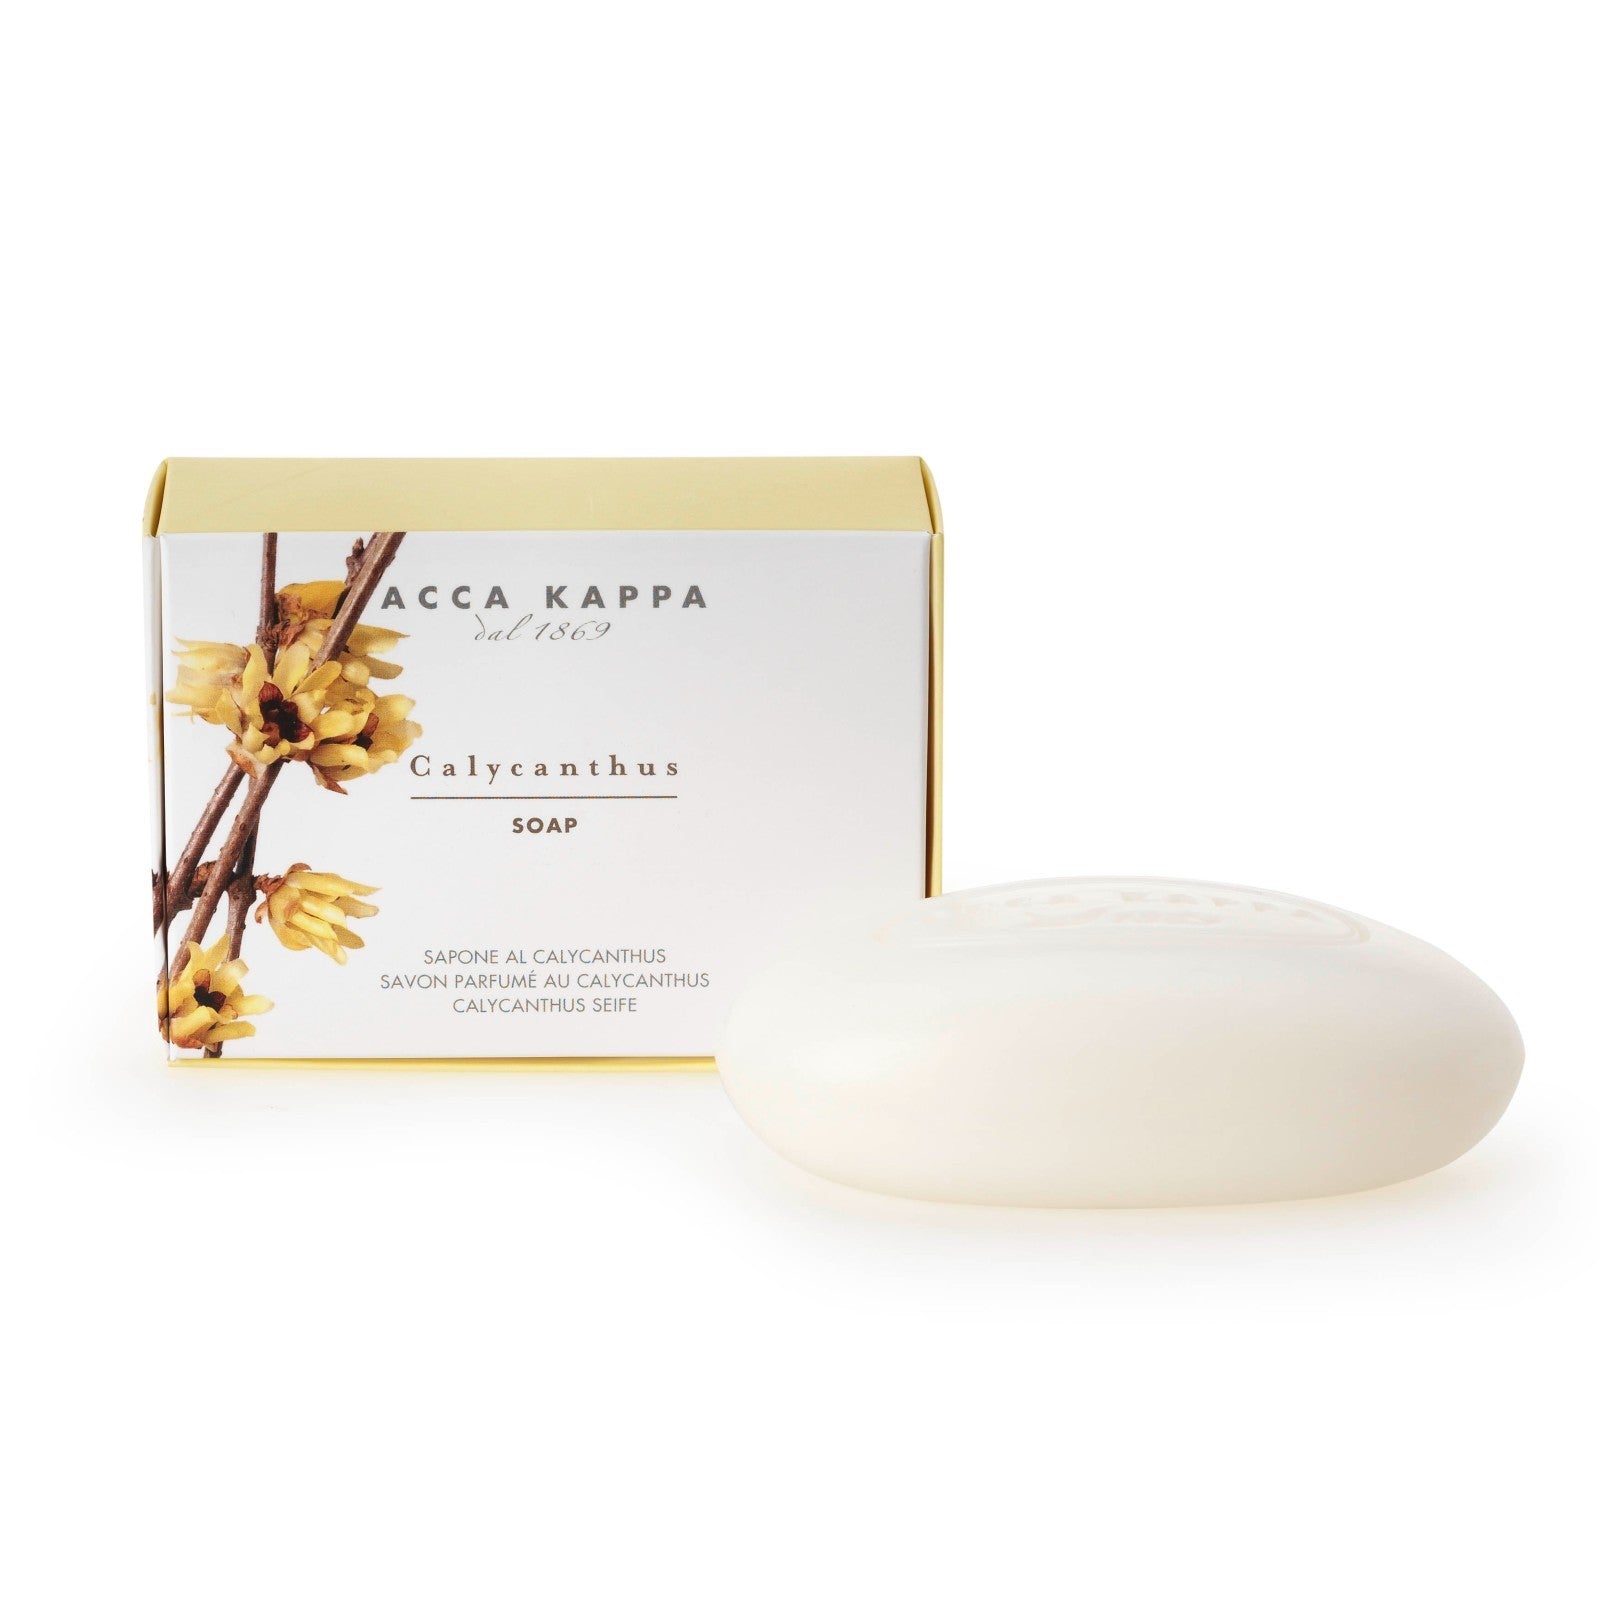 ACCA KAPPA Calycanthus Soap, 150g